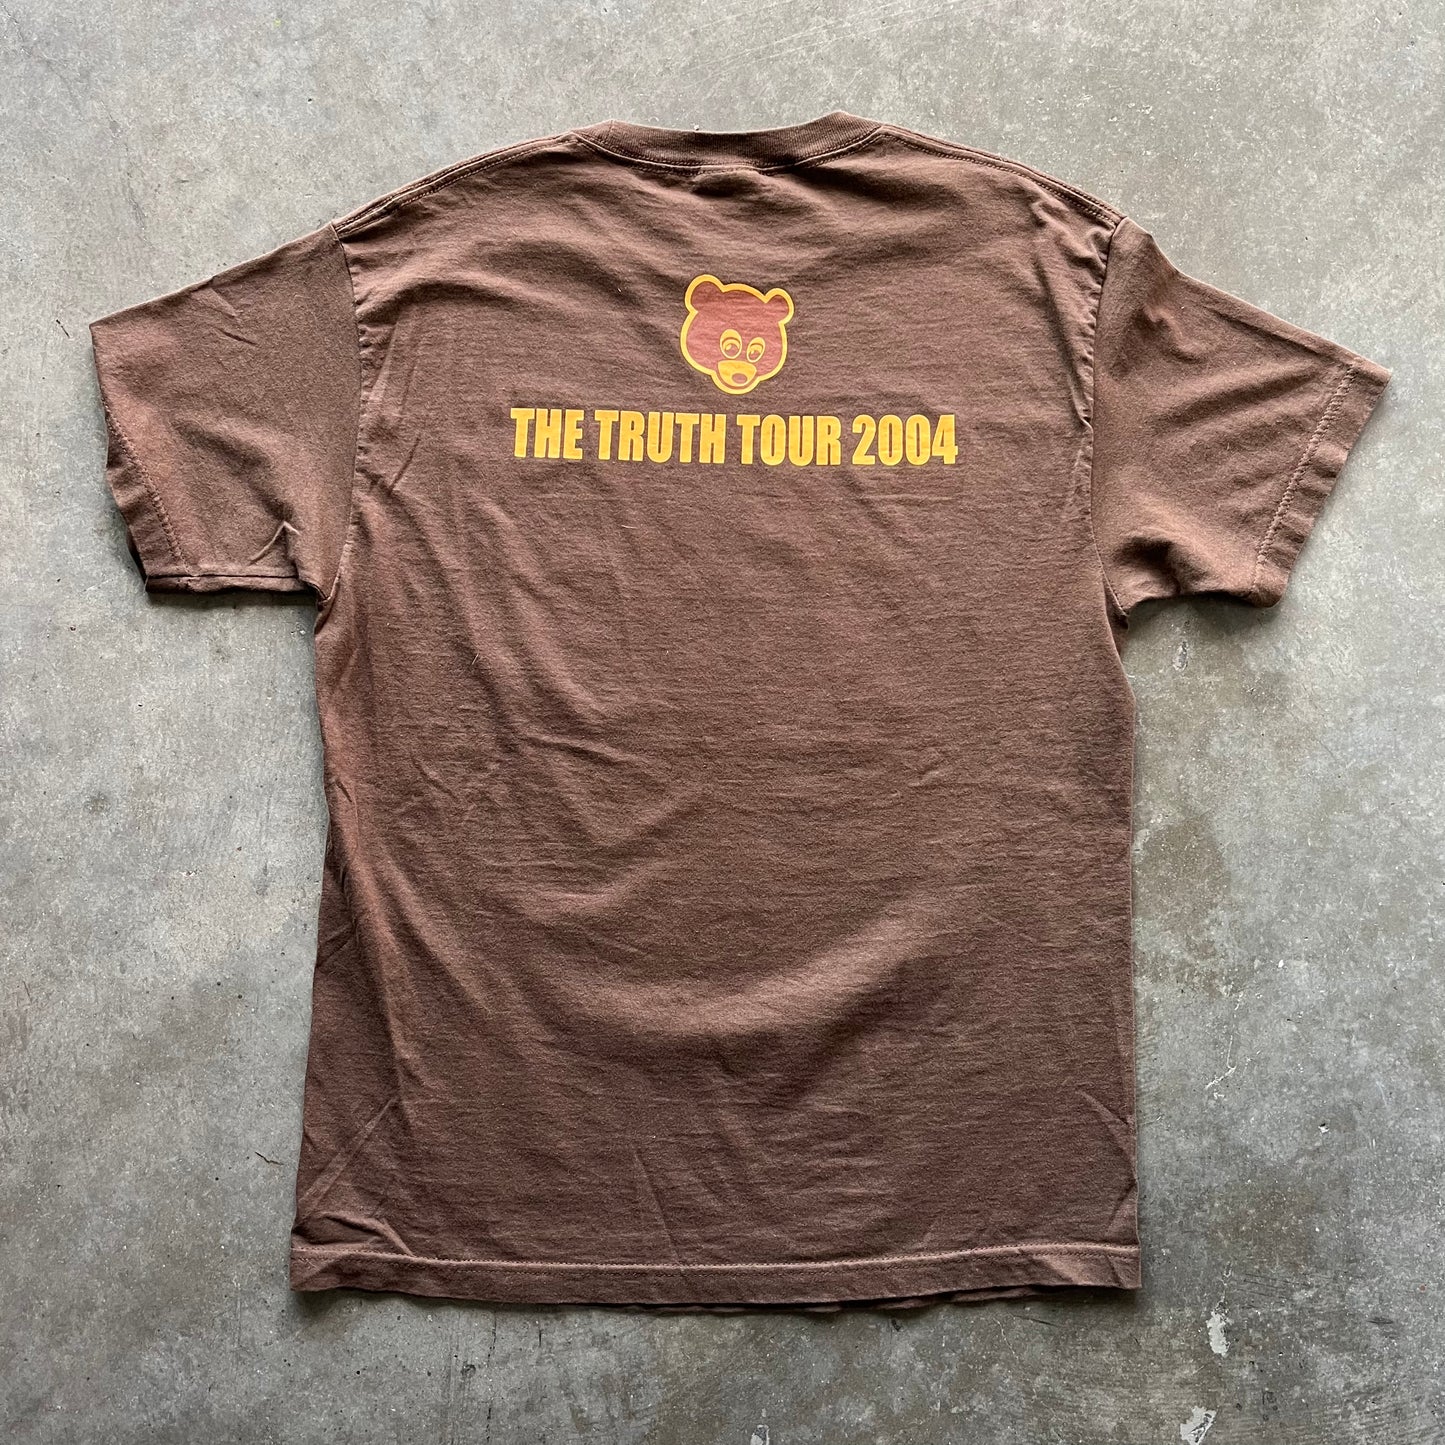 L 04 Kanye West Truth Tour Tee